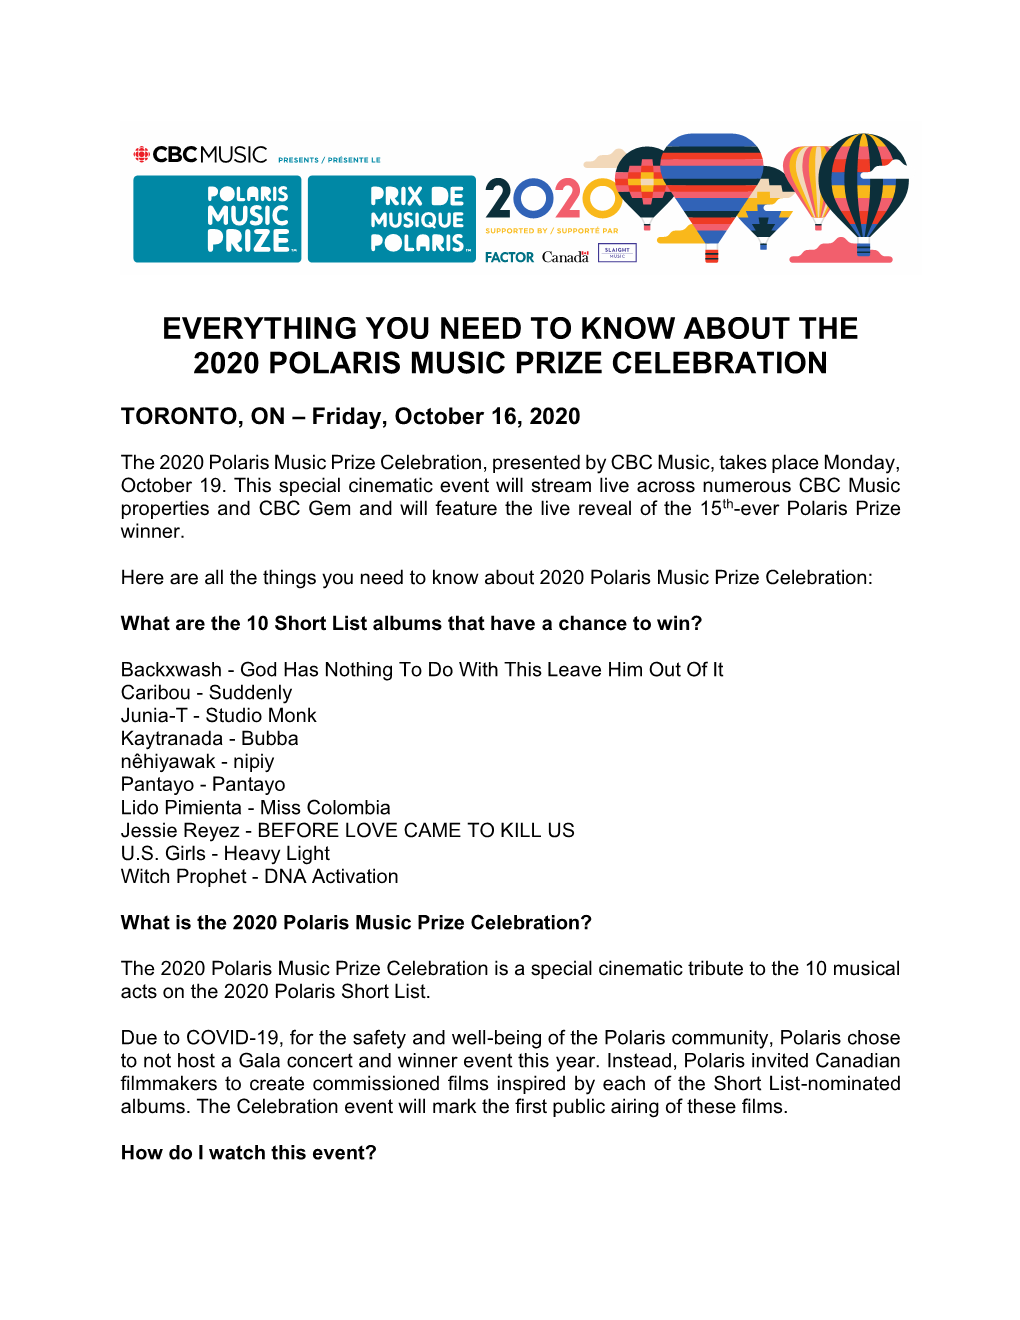 Everything You Need to Know About the 2020 Polaris Music Prize Celebration